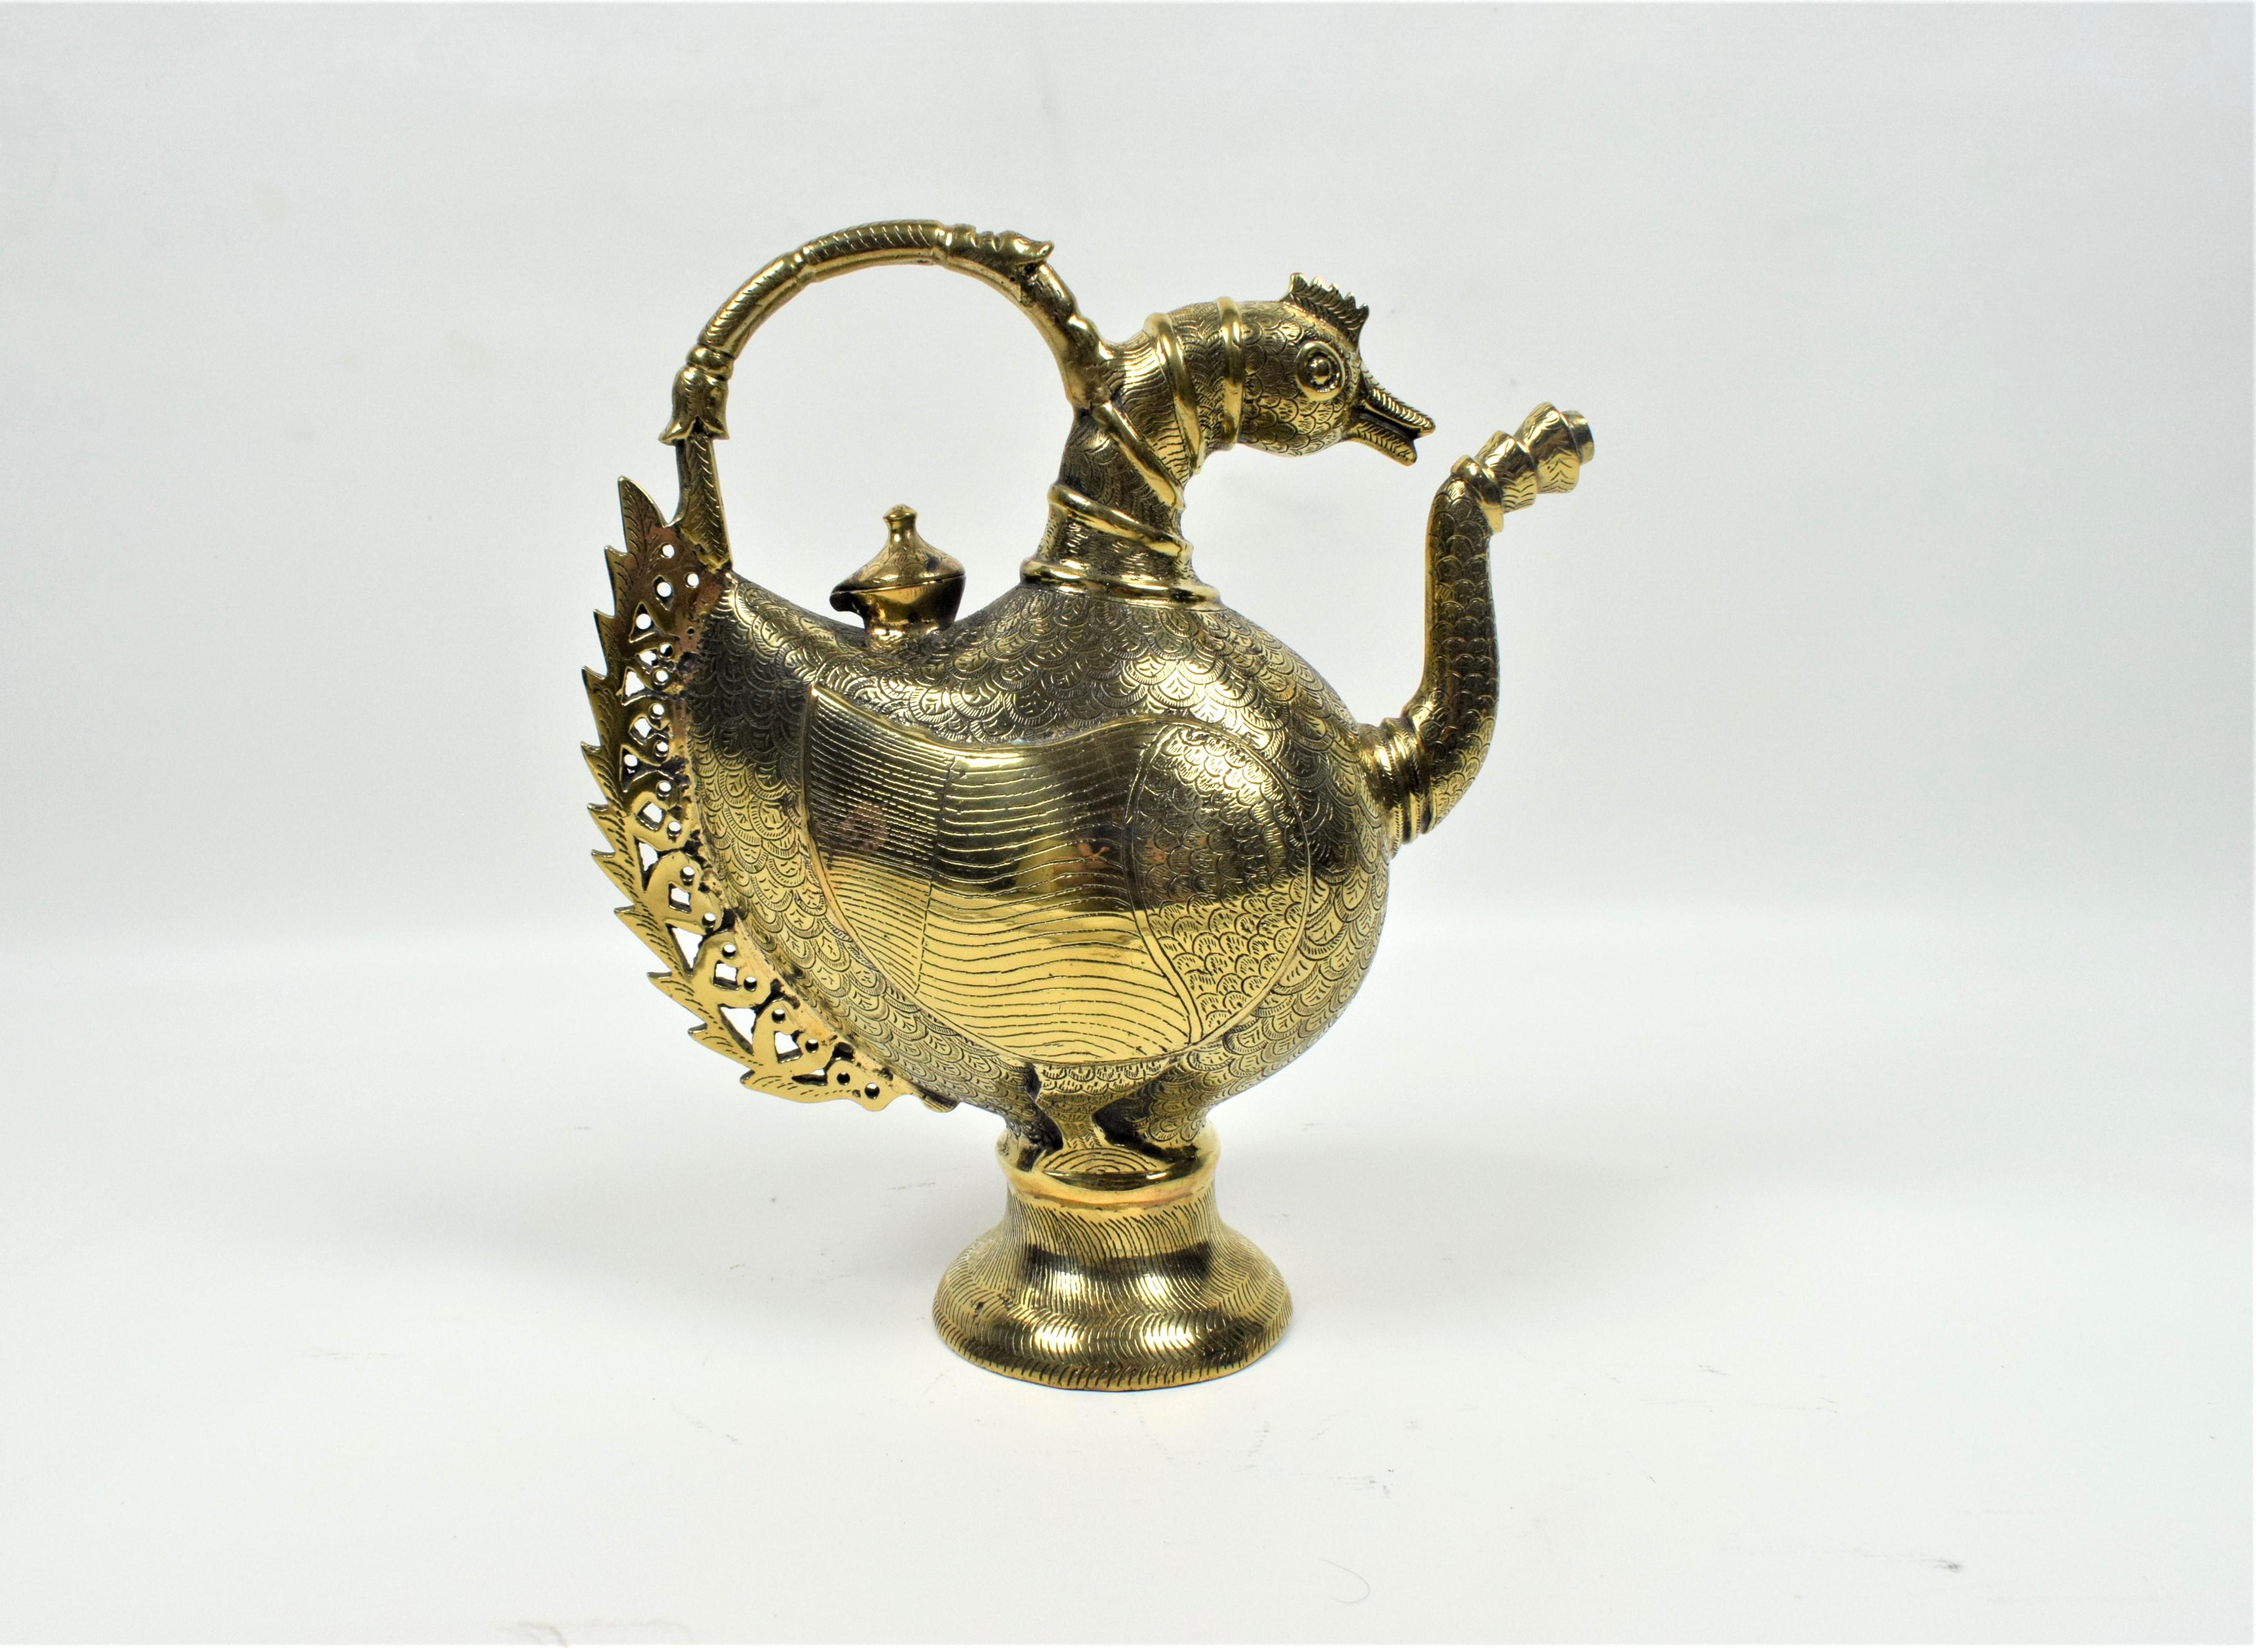 The ewer, a ceremonial pitcher, is shaped in the form of a majestic peacock, a significant motif in Mughal art symbolizing beauty, grace, and regality. The body of the ewer is crafted from high-quality brass, a metal often favored by Mughal artisans